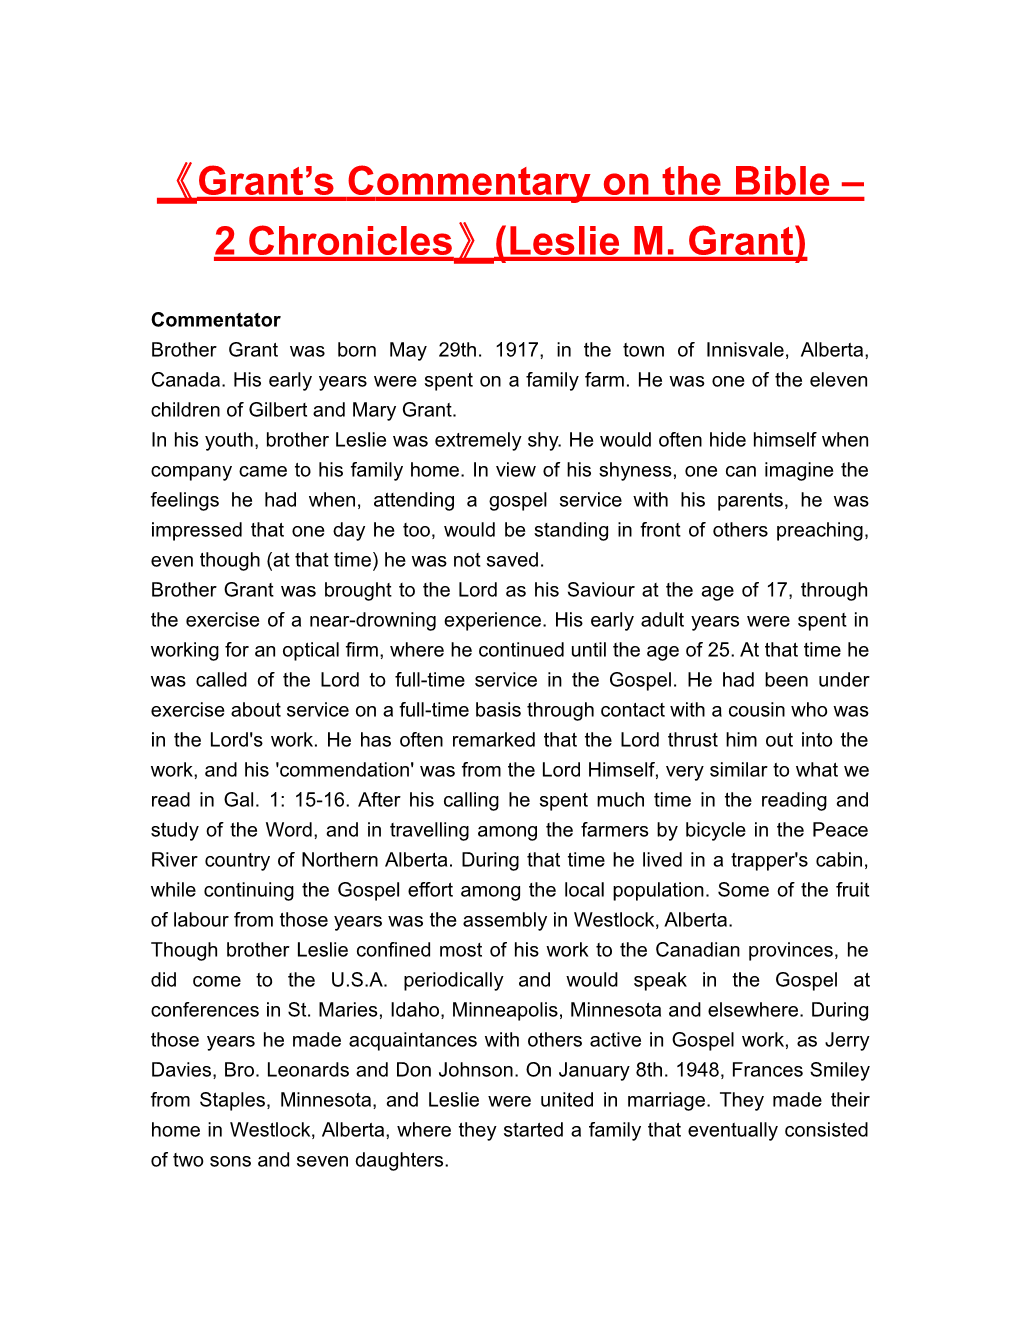 Grant Scommentaryon the Bible 2 Chronicles (Leslie M. Grant)